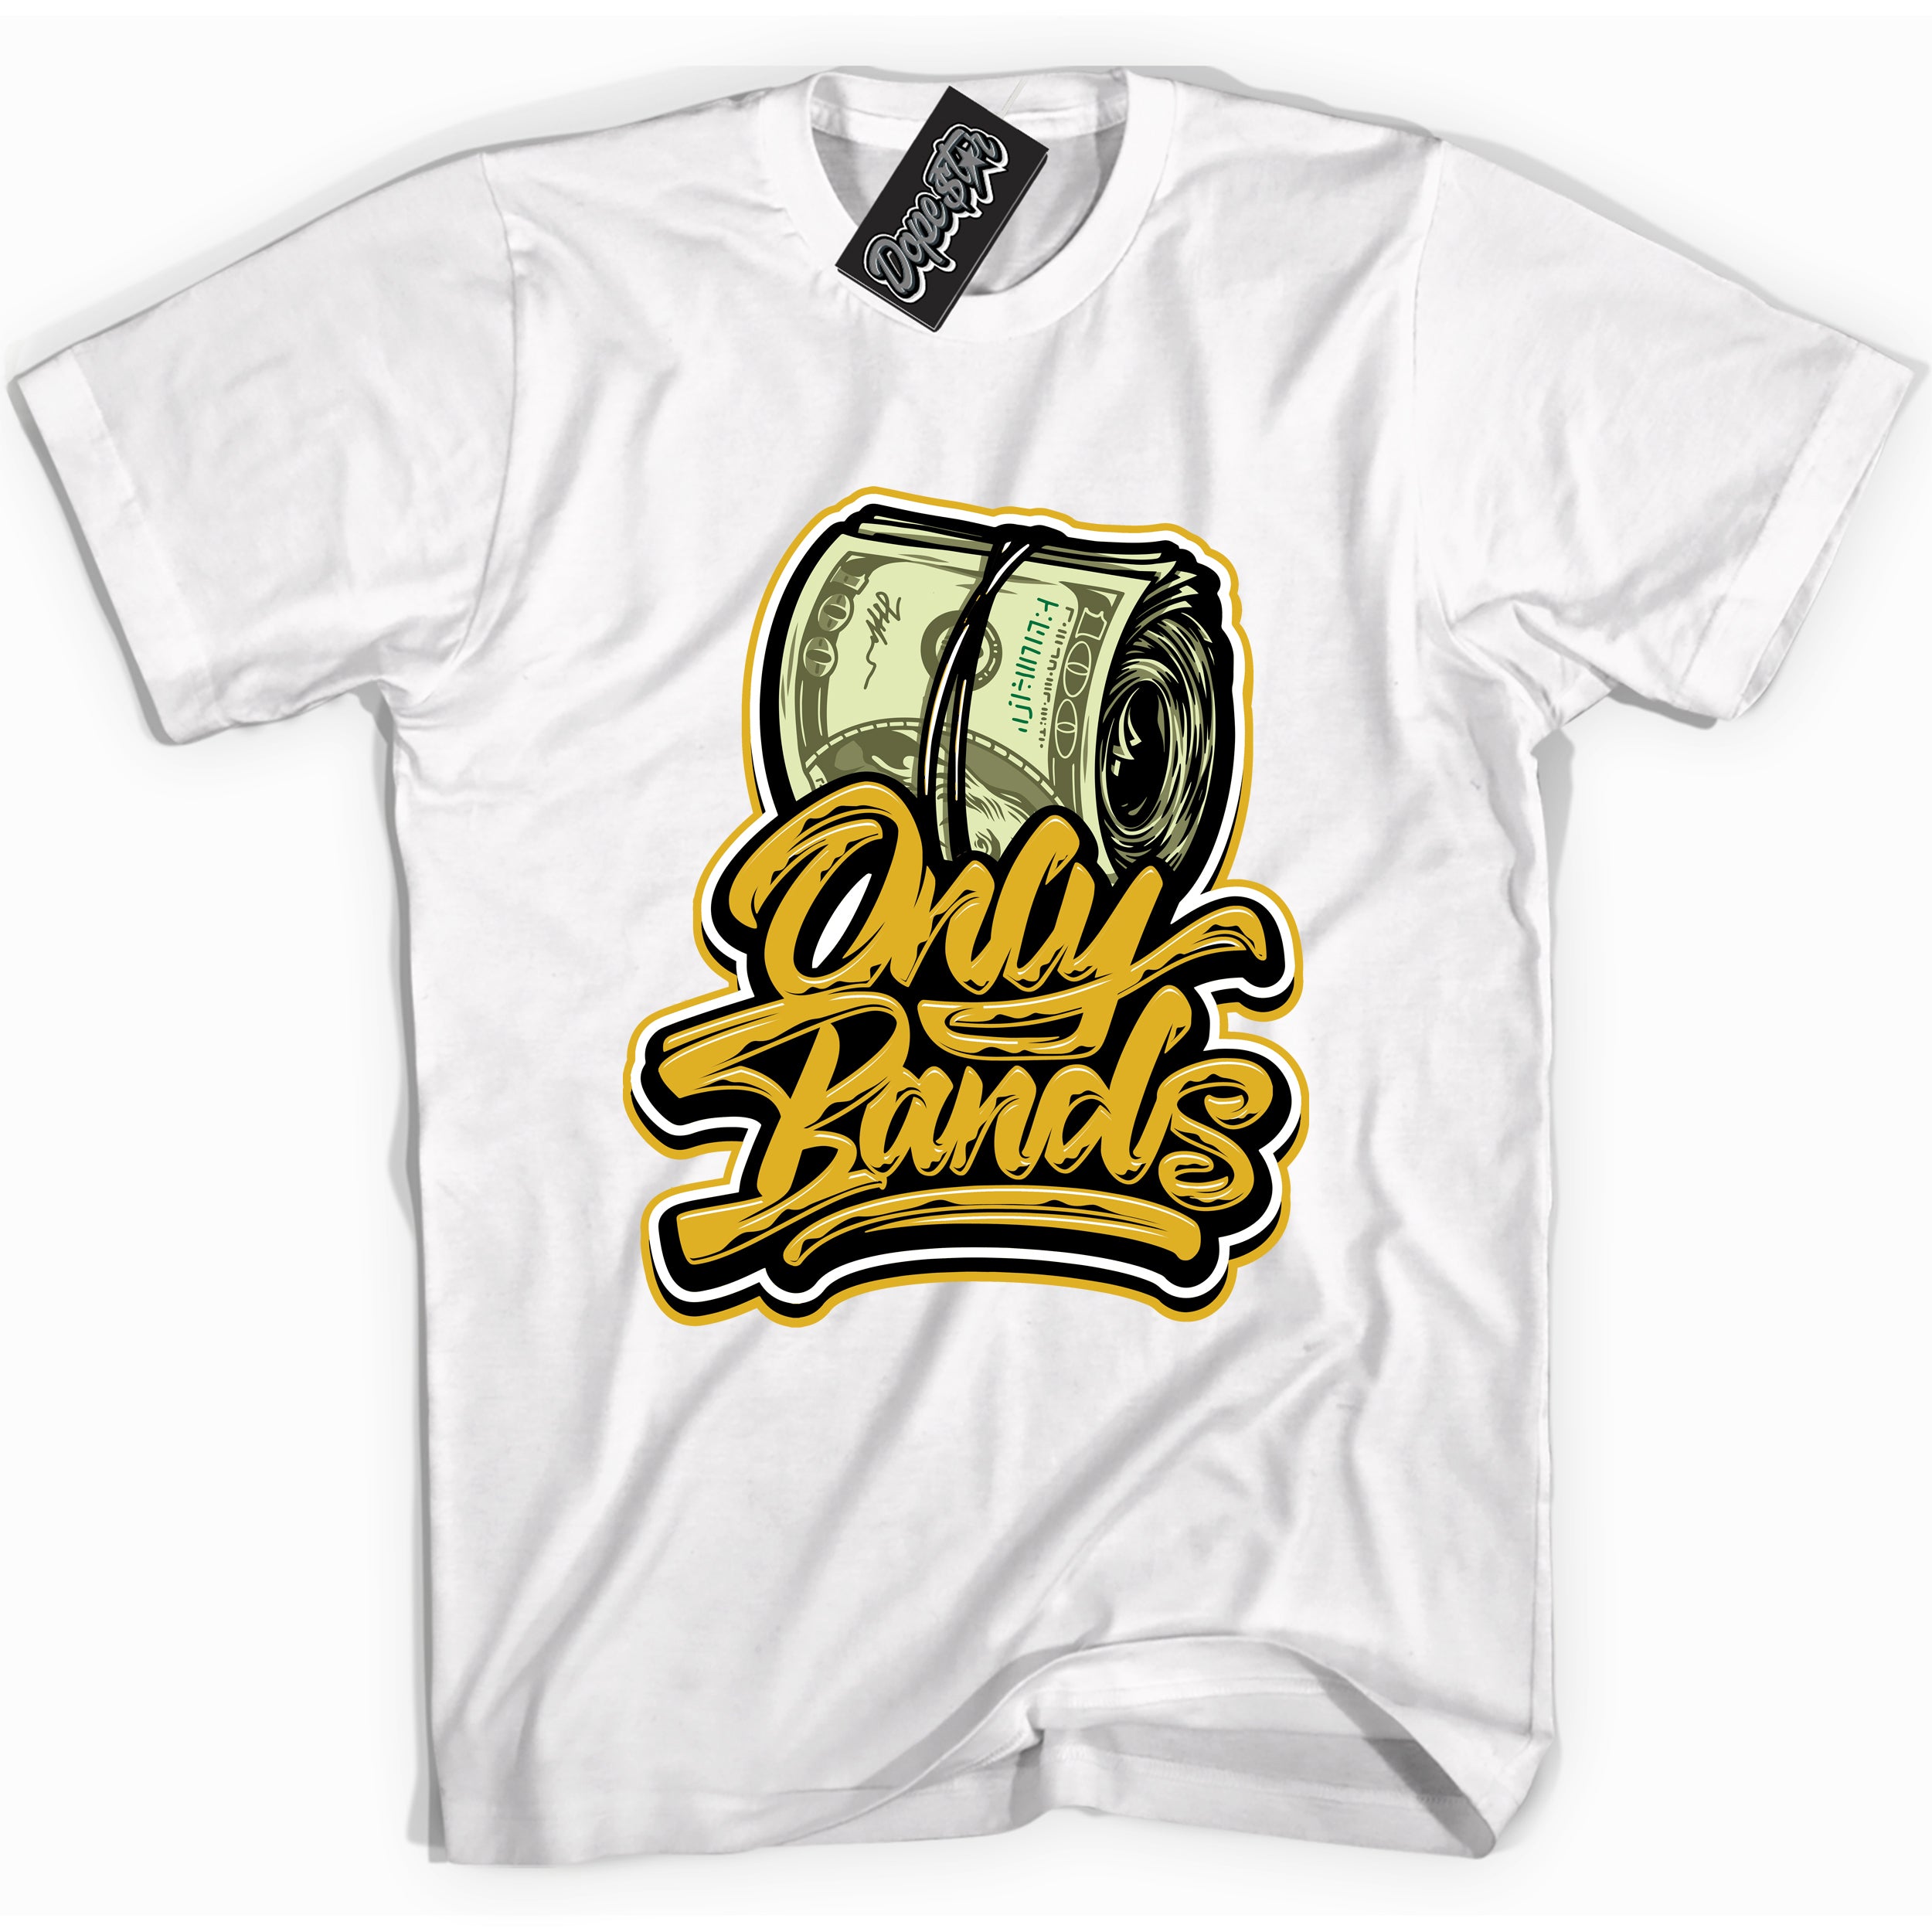 Cool White Shirt with “ Only Bands” design that perfectly matches Yellow Ochre 6s Sneakers.